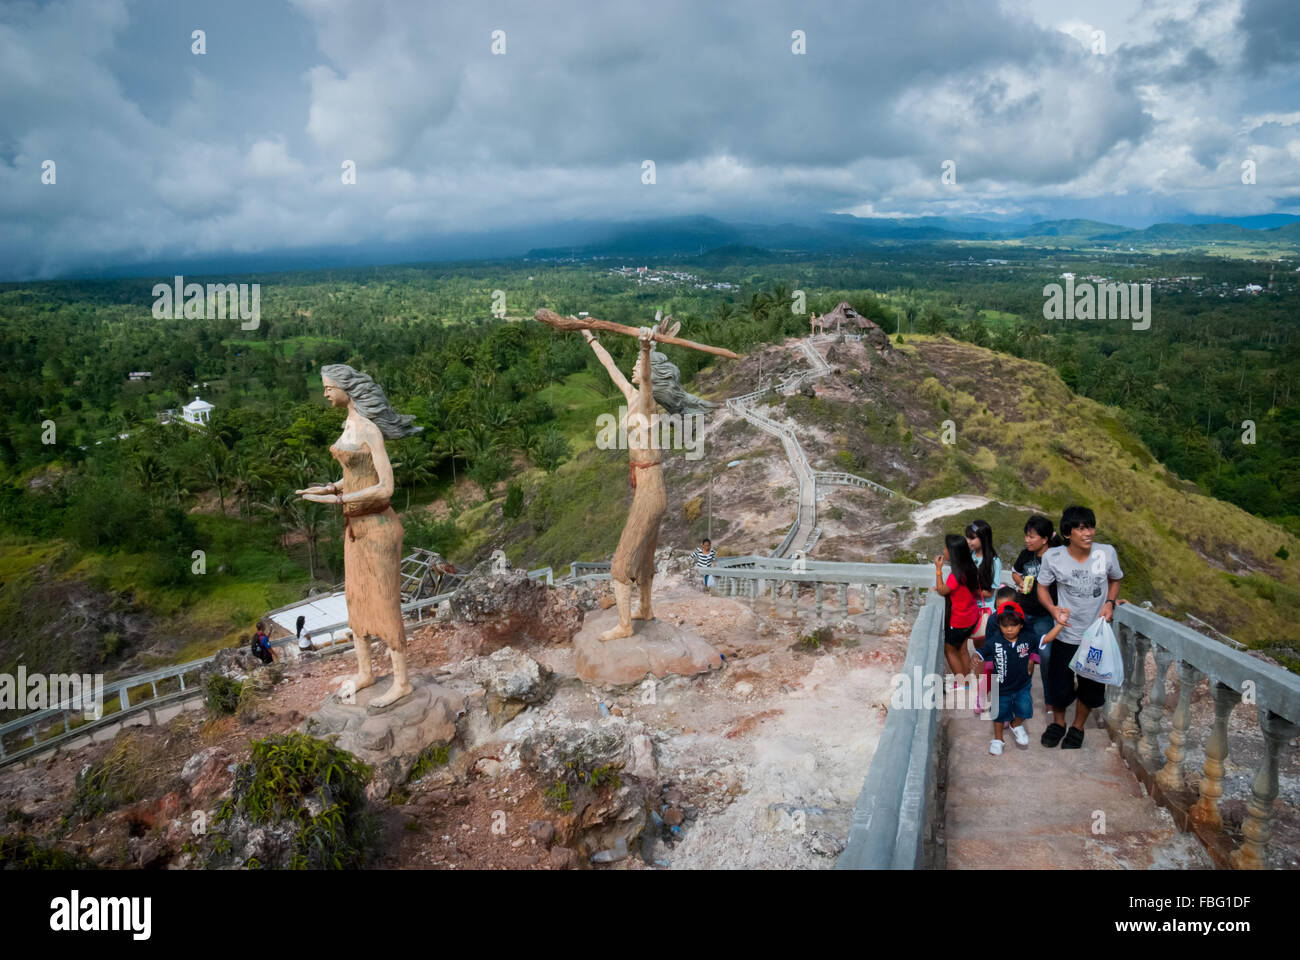 Visitors stepping up concrete stairs leading to the main attractions at Bukit Kasih, a popular destination in North Sulawesi, Indonesia. Stock Photo